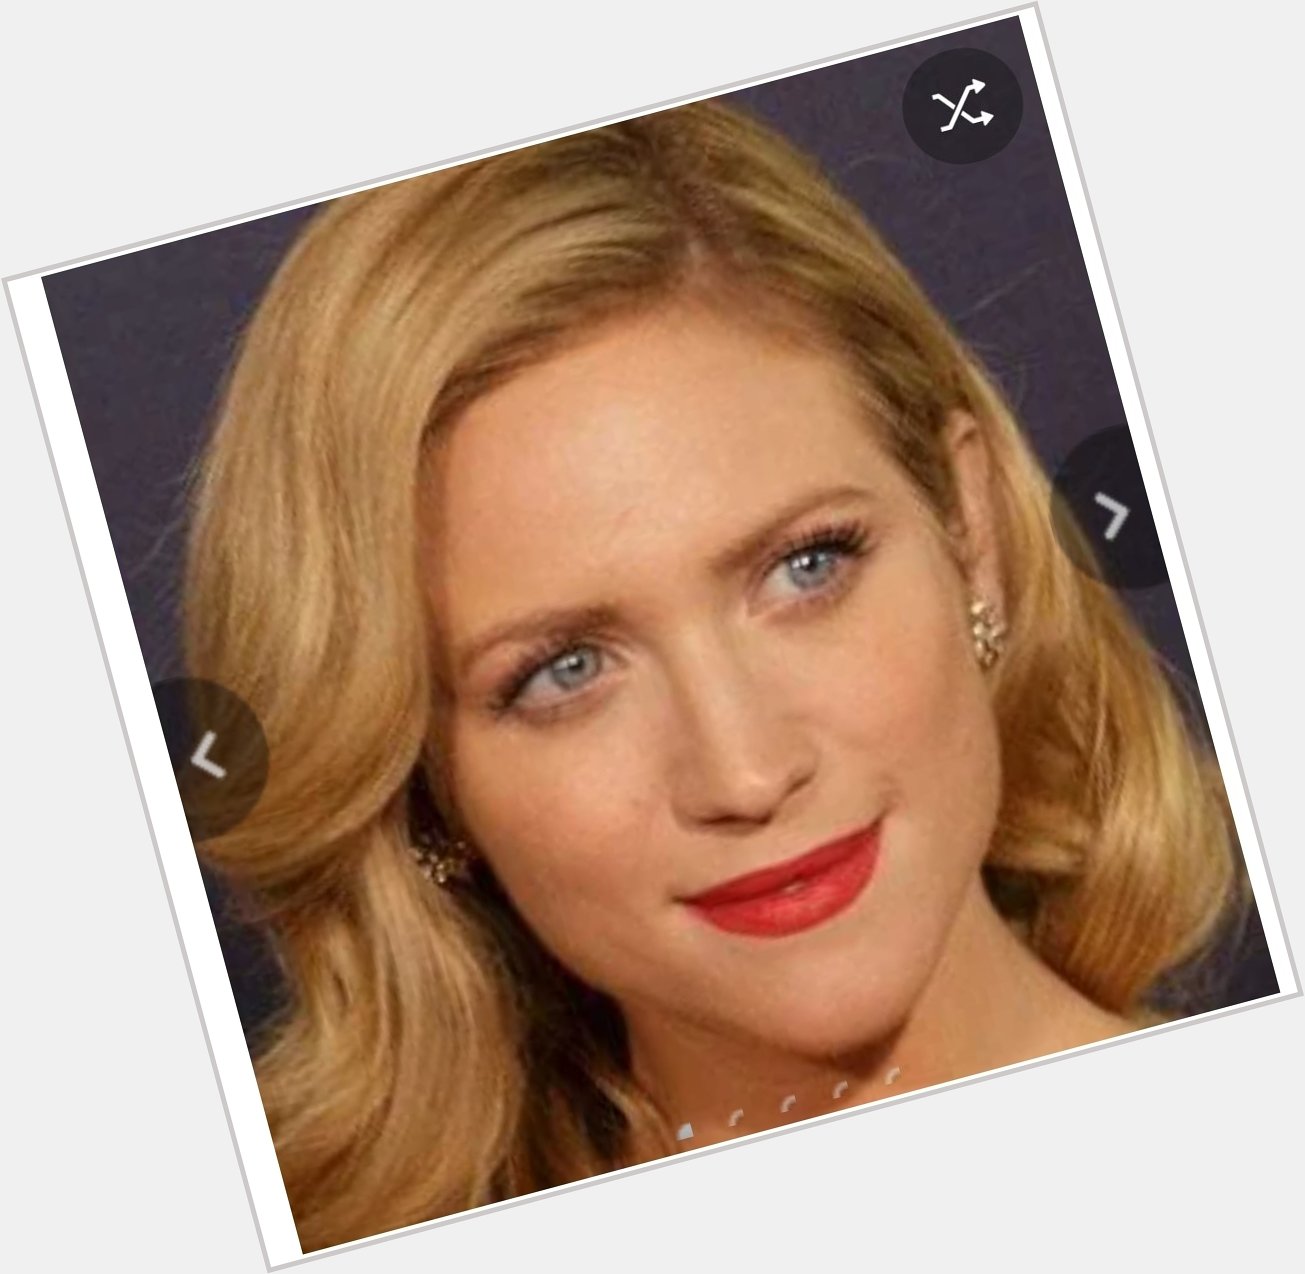 Happy birthday to a beautiful young lady. Happy birthday to Brittany Snow 